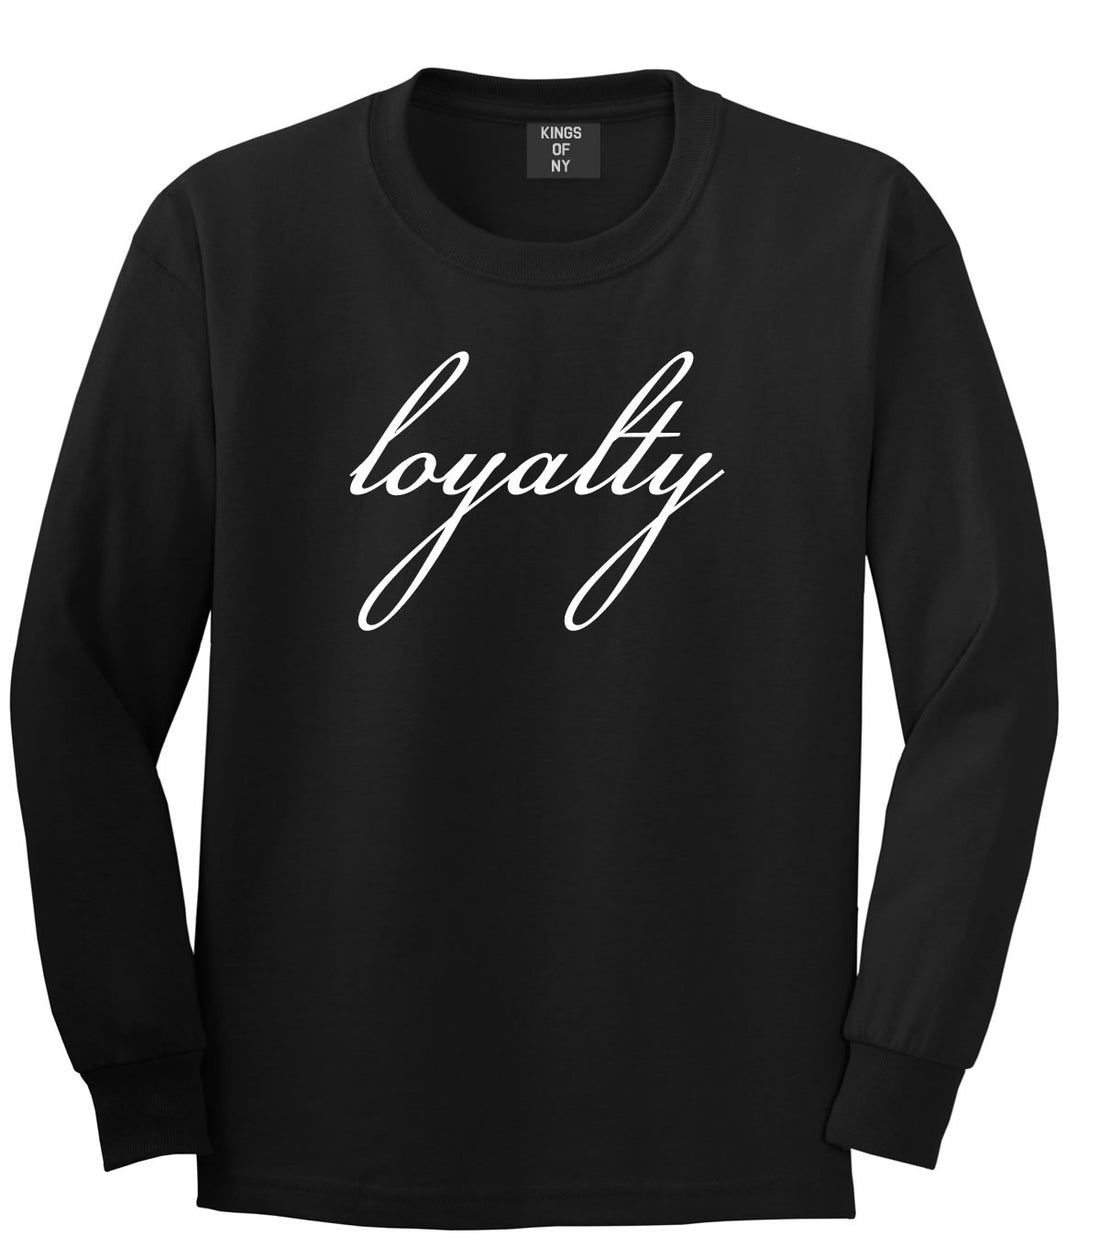 Loyalty Respect Aint New York Hoes Long Sleeve Boys Kids T-Shirt In Black by Kings Of NY